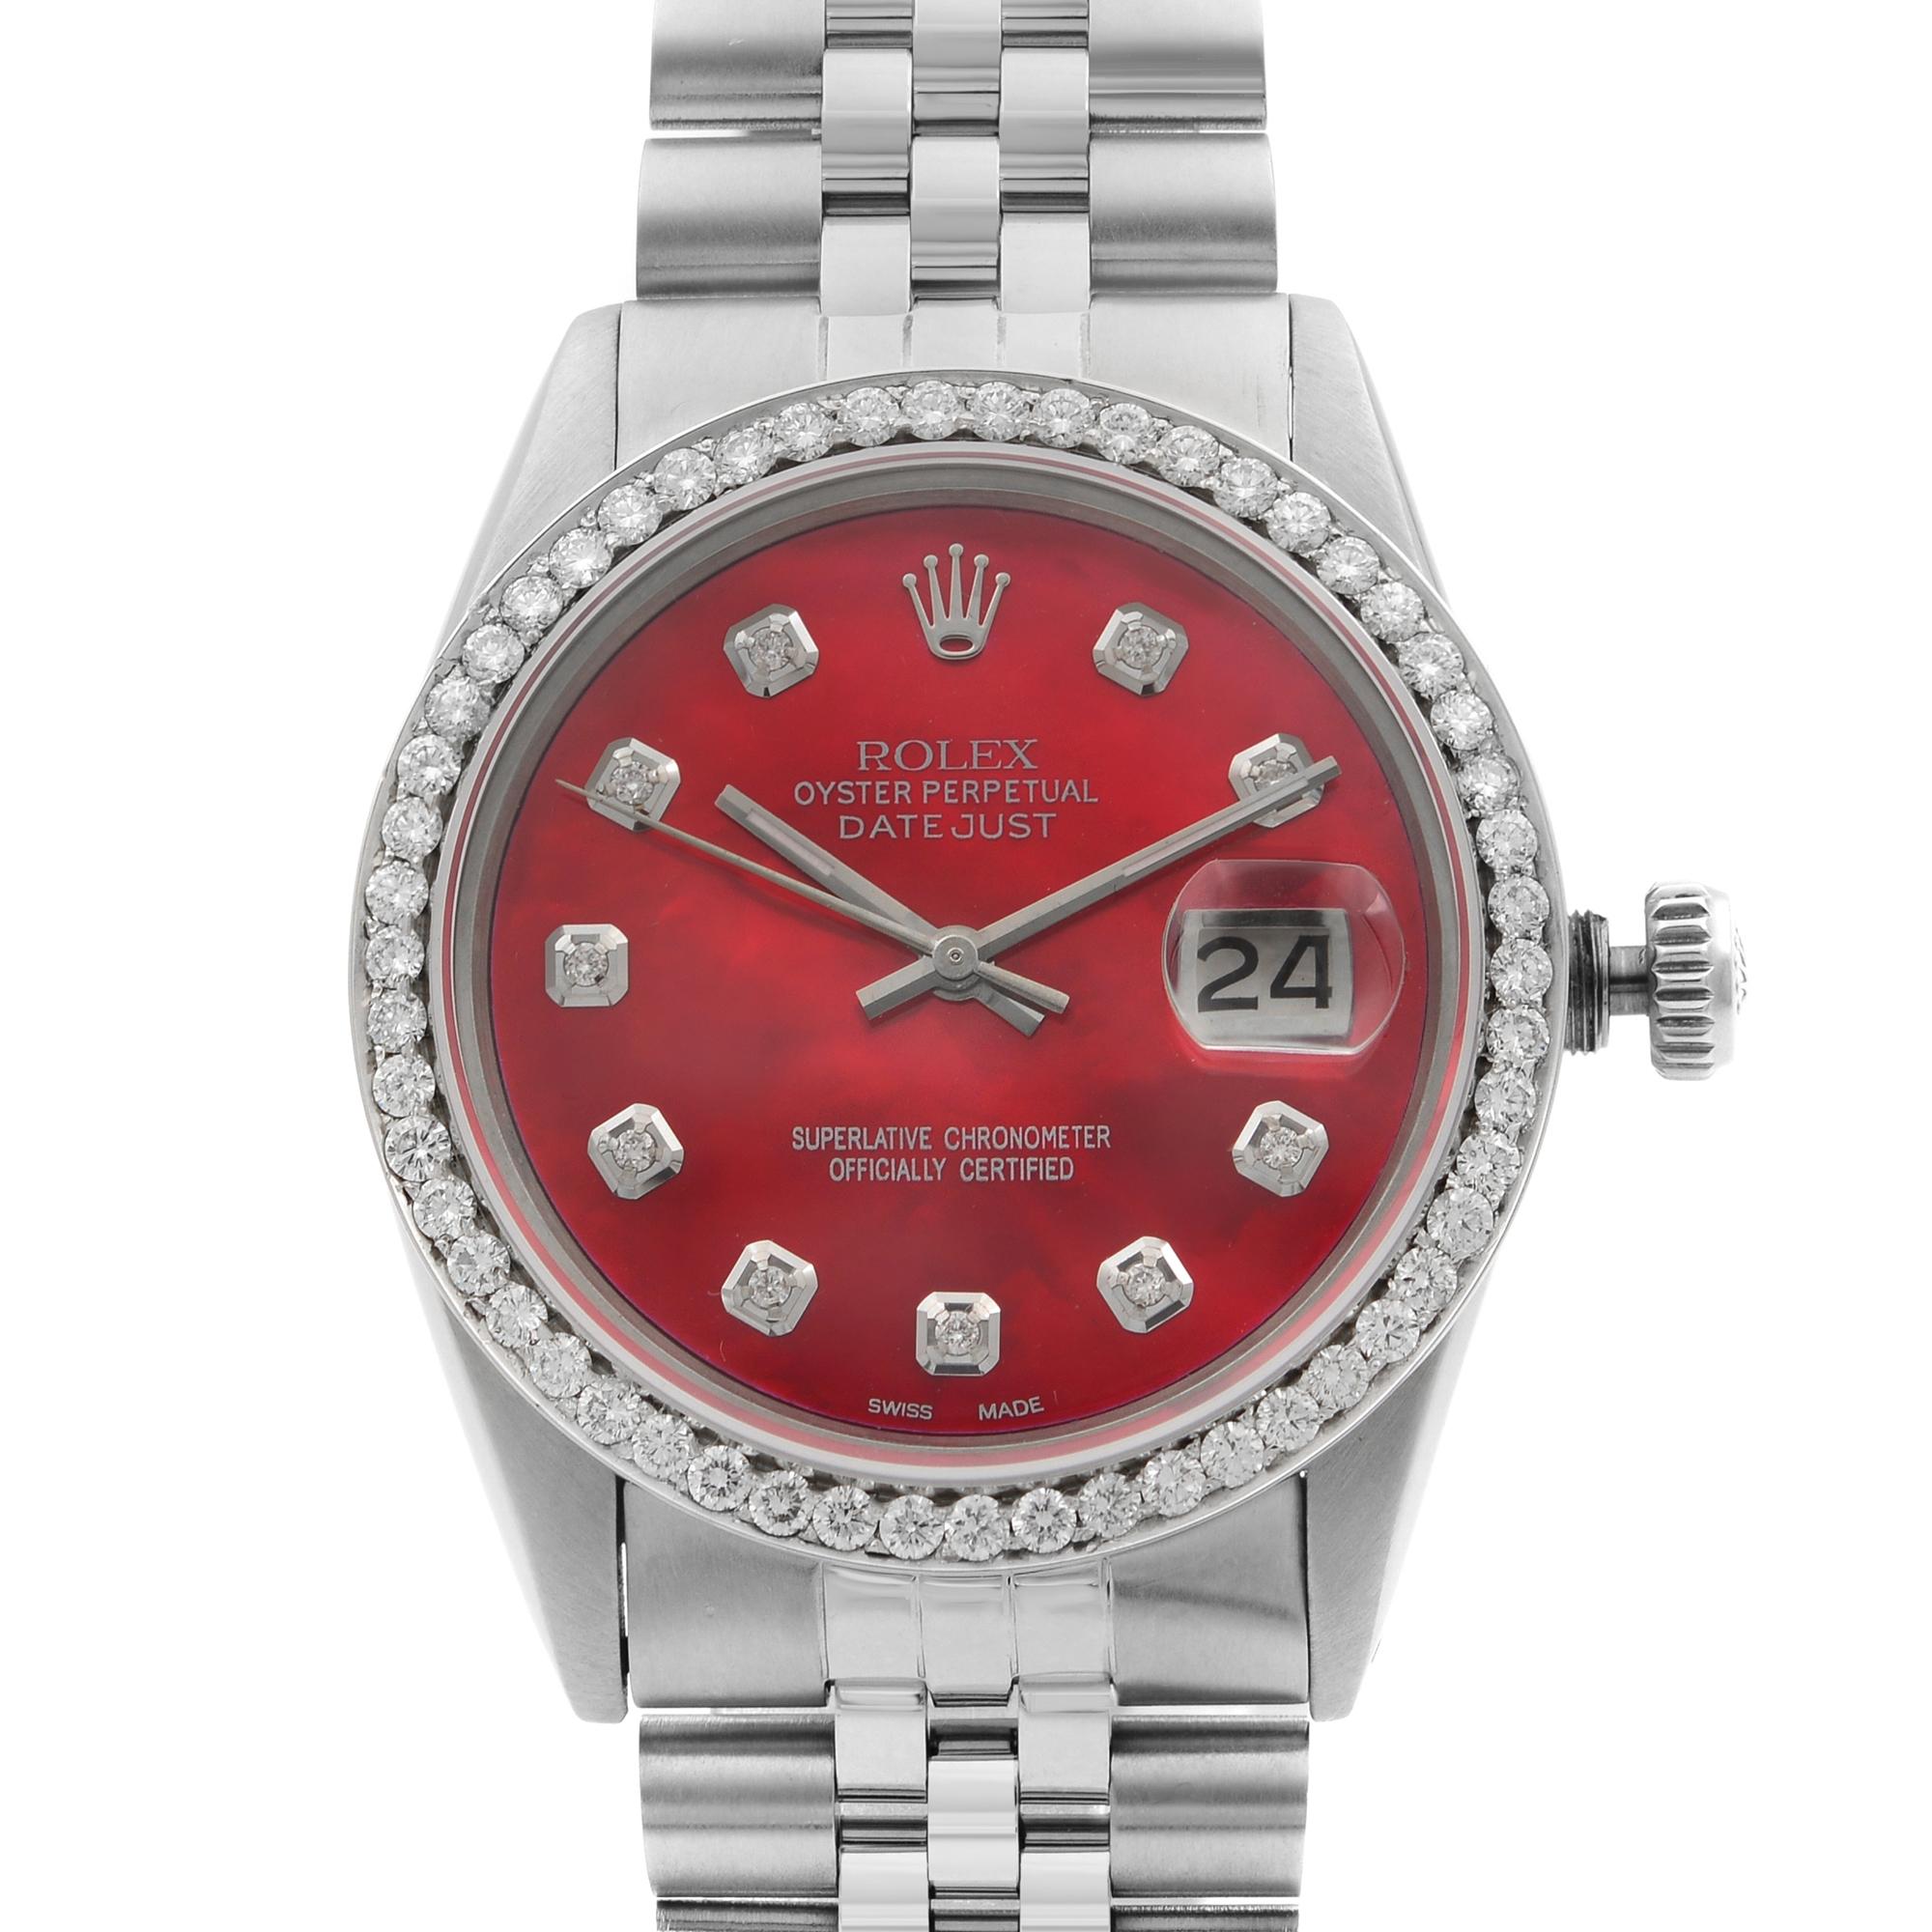 1 Cttw Custom Diamond Bezel and 0.20 Cttw Custom Diamond Red MOP Dial. The original Box and Papers are not included. Come with a Chronostore presentation box and an authenticity card. Covered by a one-year Chronostore warranty.Details:

Brand and